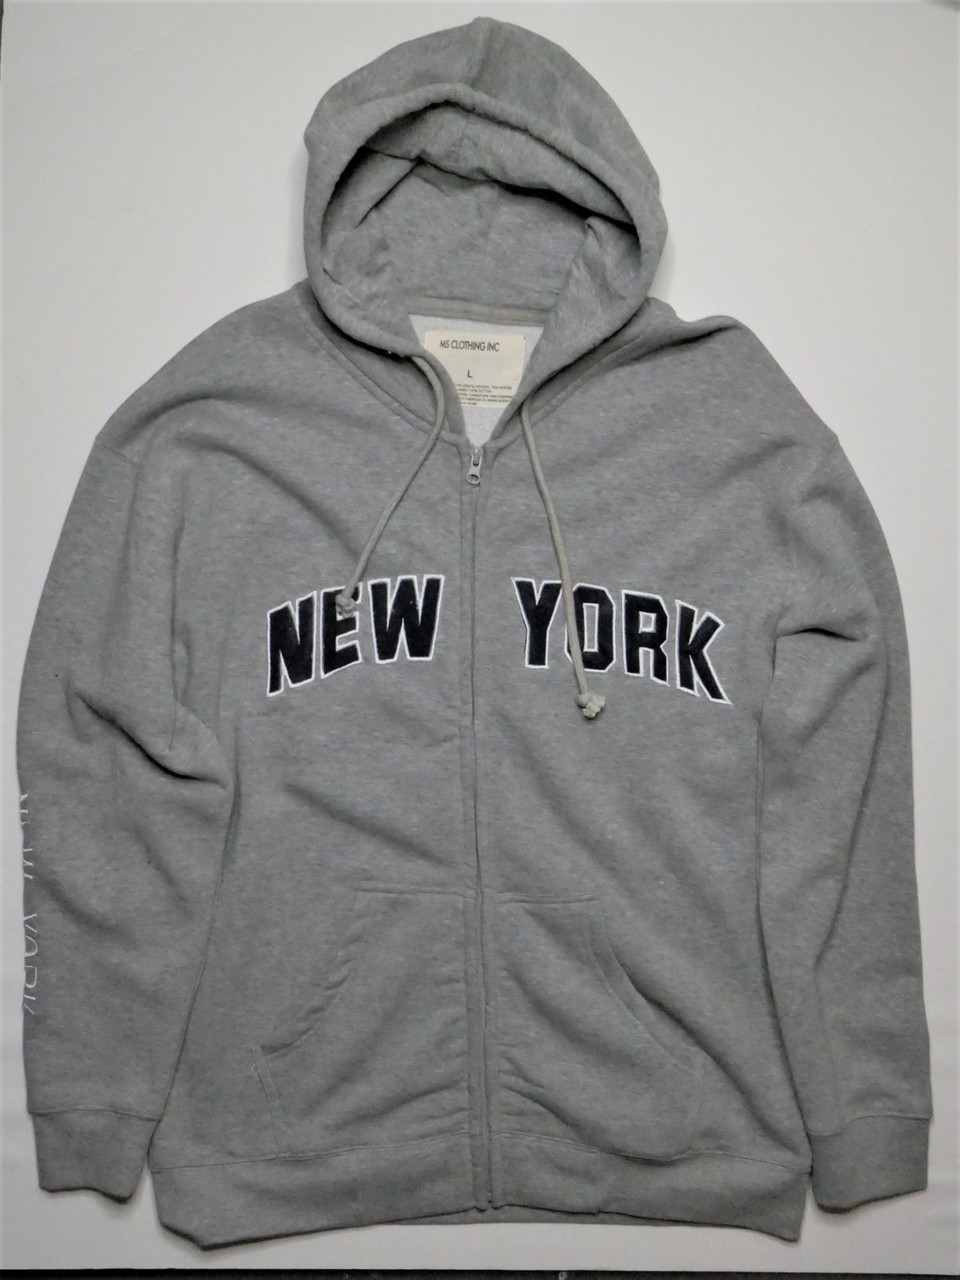 New York Zipper Hoodies for Adults-1610395234 - NEW YORK GIFTS